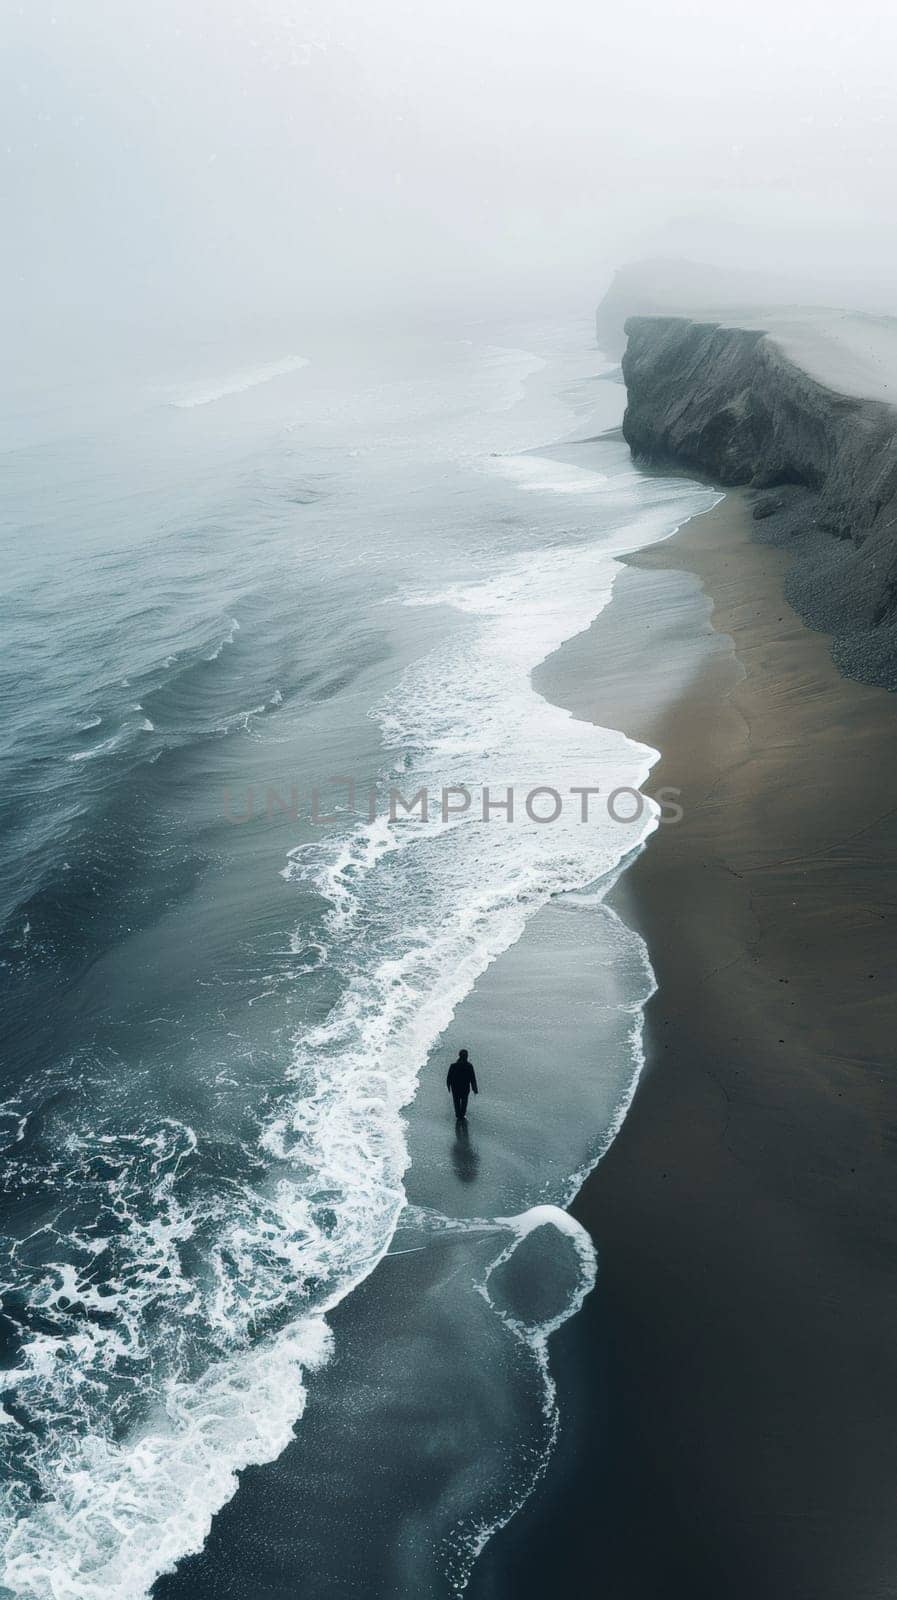 A person walking along the beach with a surfboard in hand, AI by starush